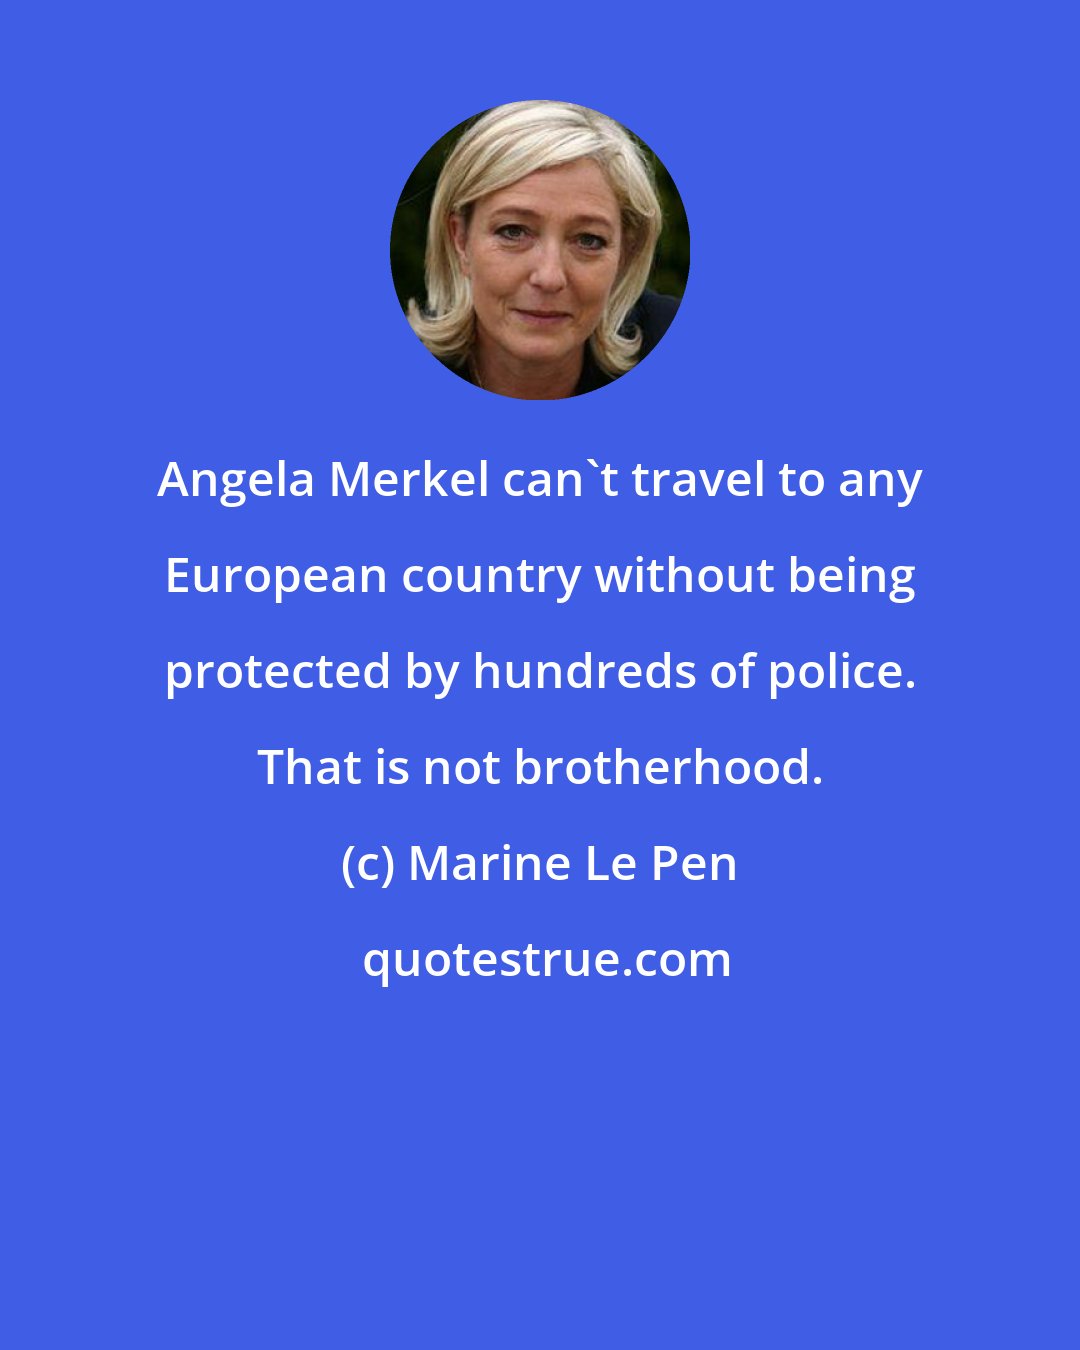 Marine Le Pen: Angela Merkel can't travel to any European country without being protected by hundreds of police. That is not brotherhood.